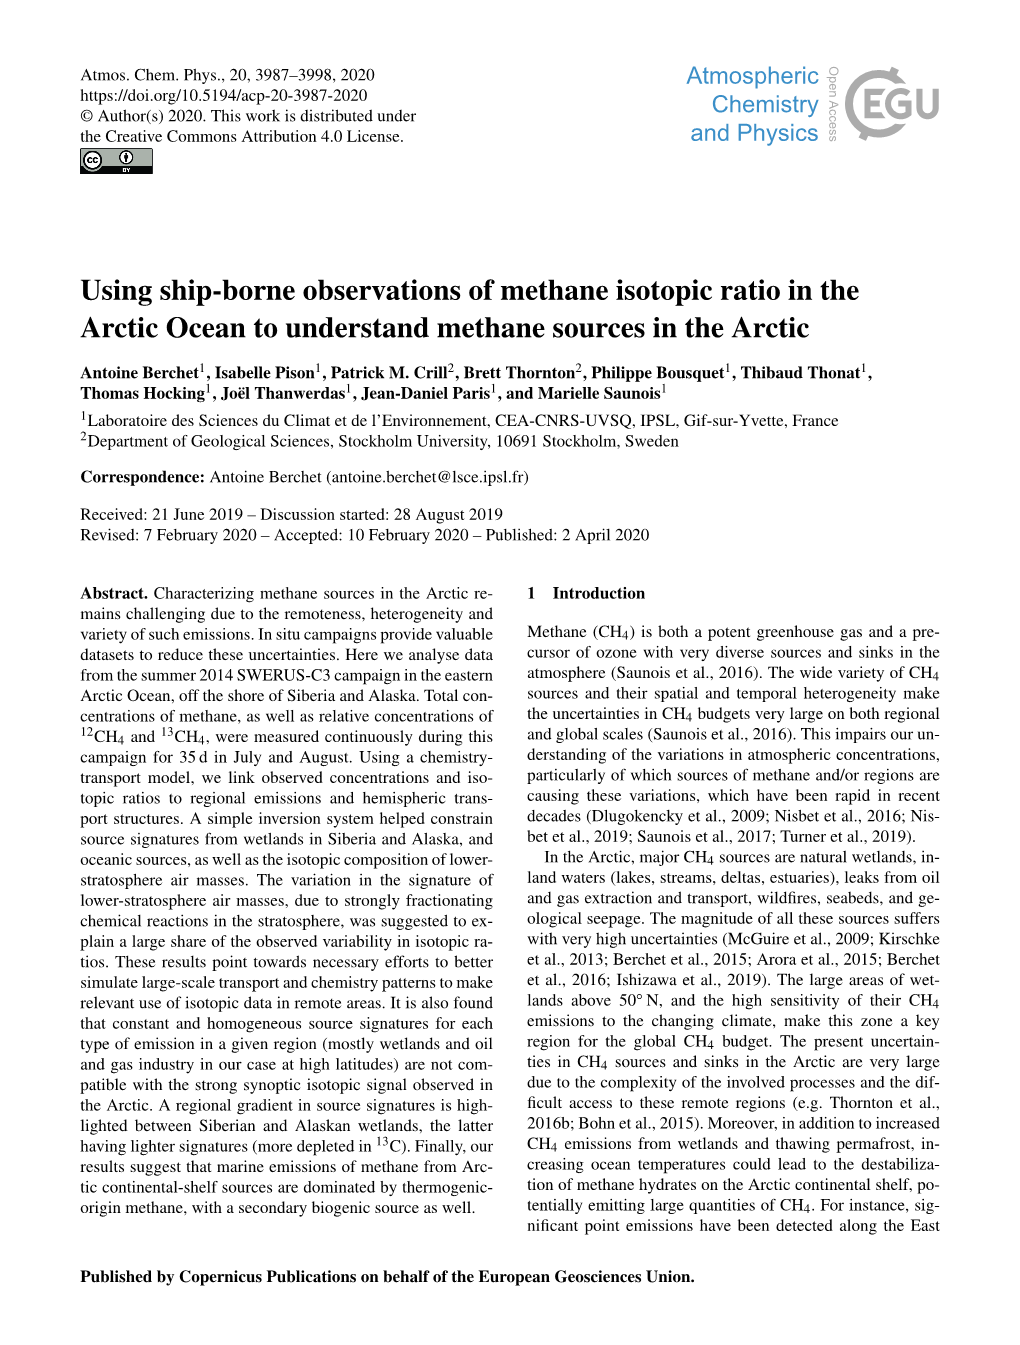 Using Ship-Borne Observations of Methane Isotopic Ratio in the Arctic Ocean to Understand Methane Sources in the Arctic